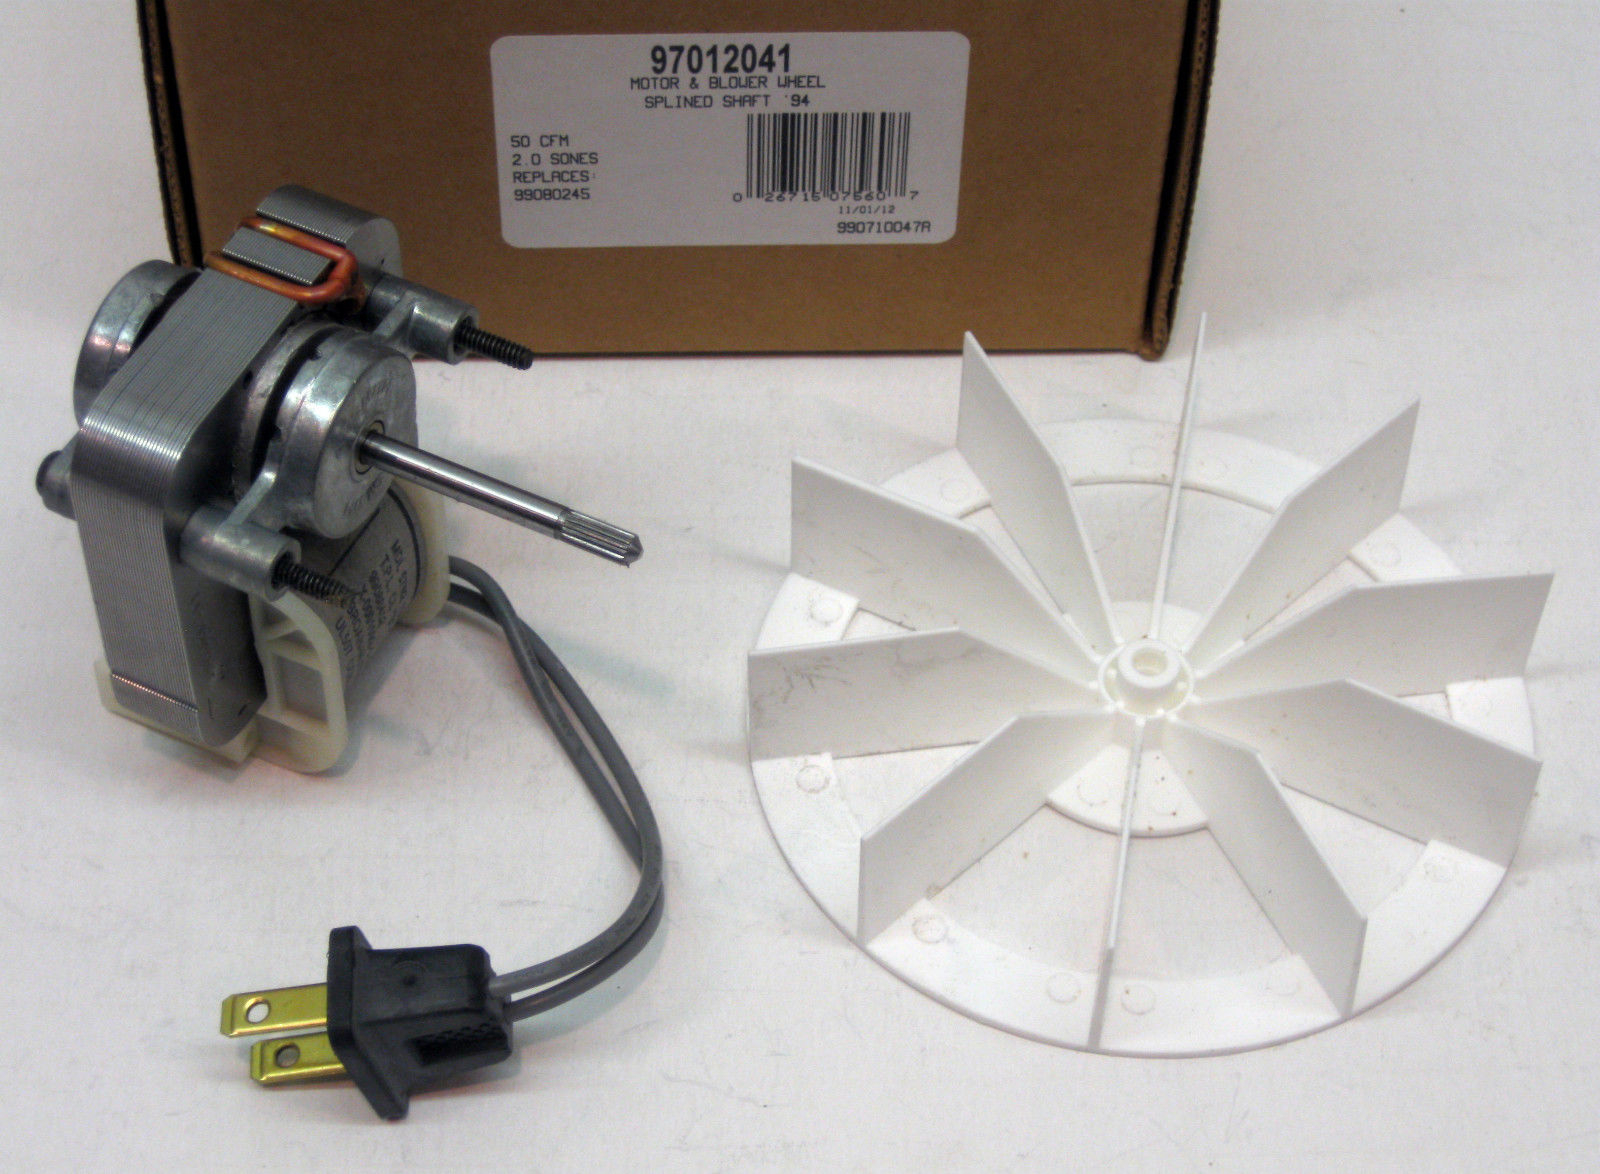 Broan Bathroom Fan Replacement Motor Image Of Bathroom And pertaining to size 1600 X 1174